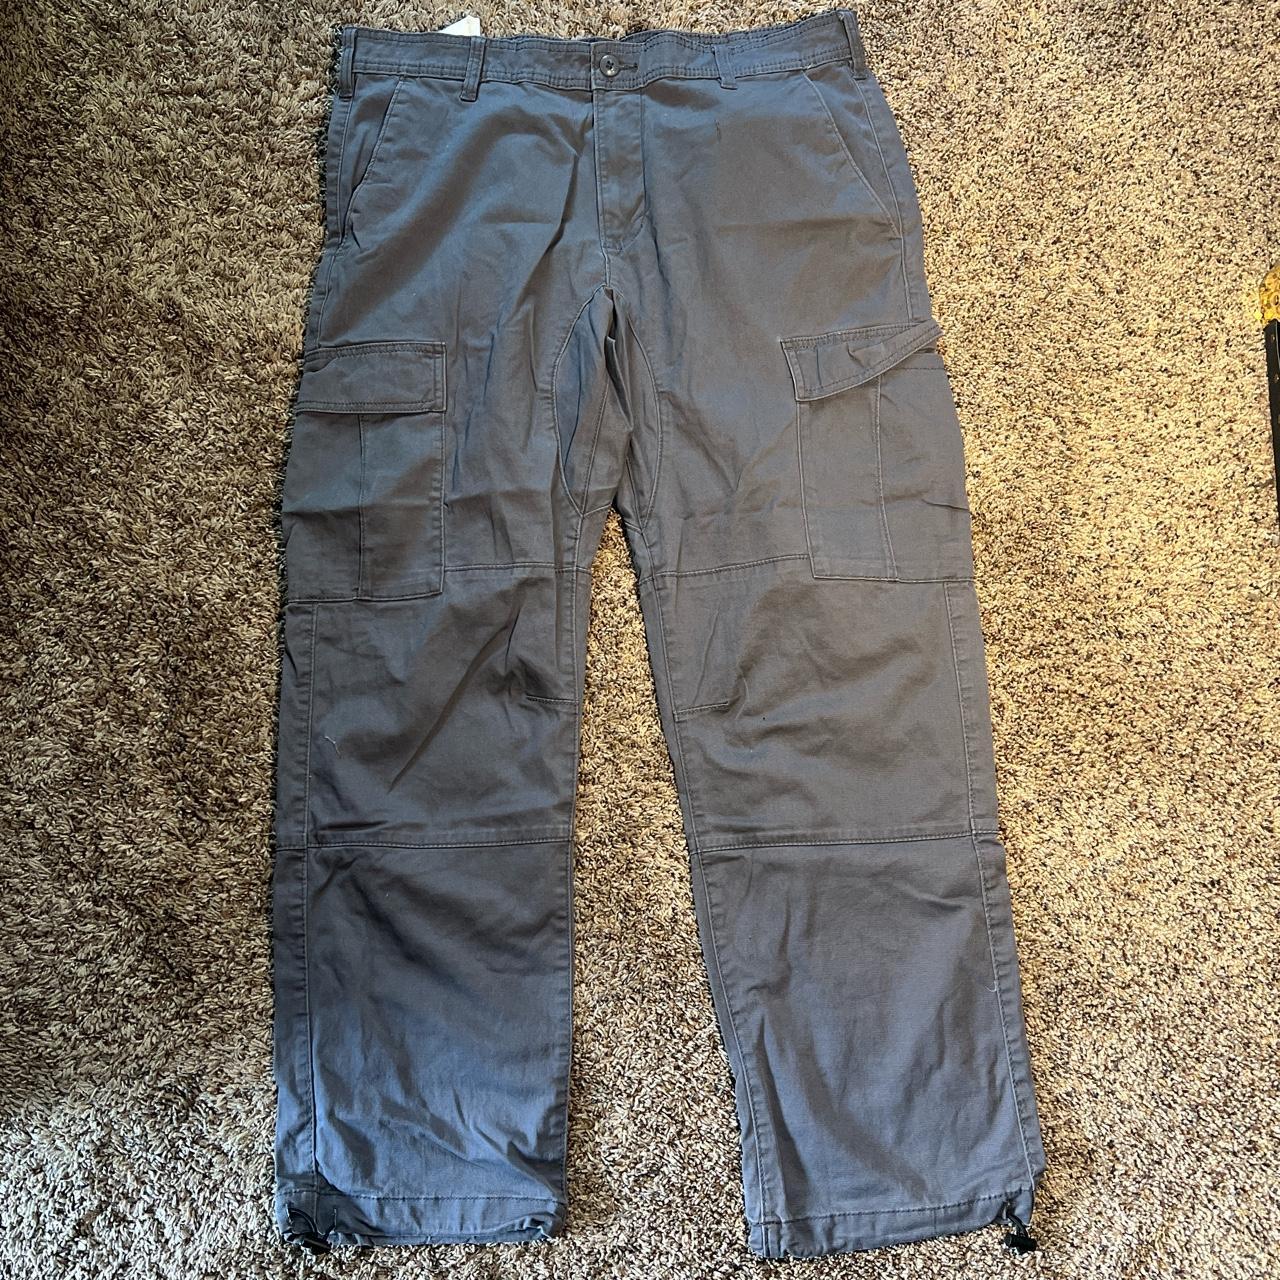 Gray No Boundaries cargo pants with Elastic cuffs